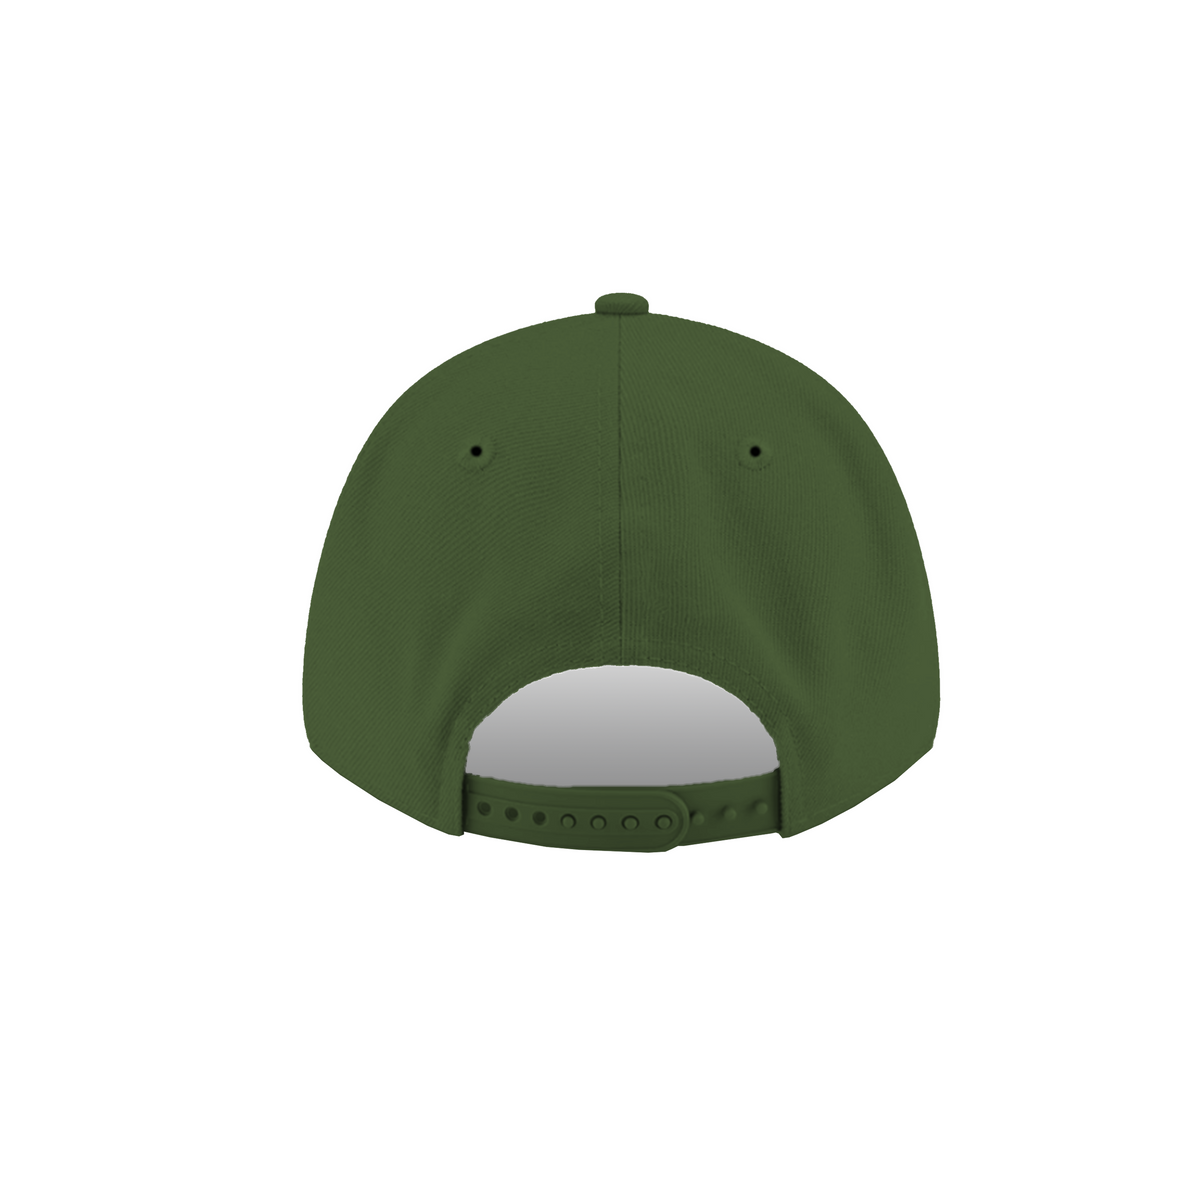 MDB Brand x New Era 9Forty Stretch Snap Embroidered Cap - Camoflage